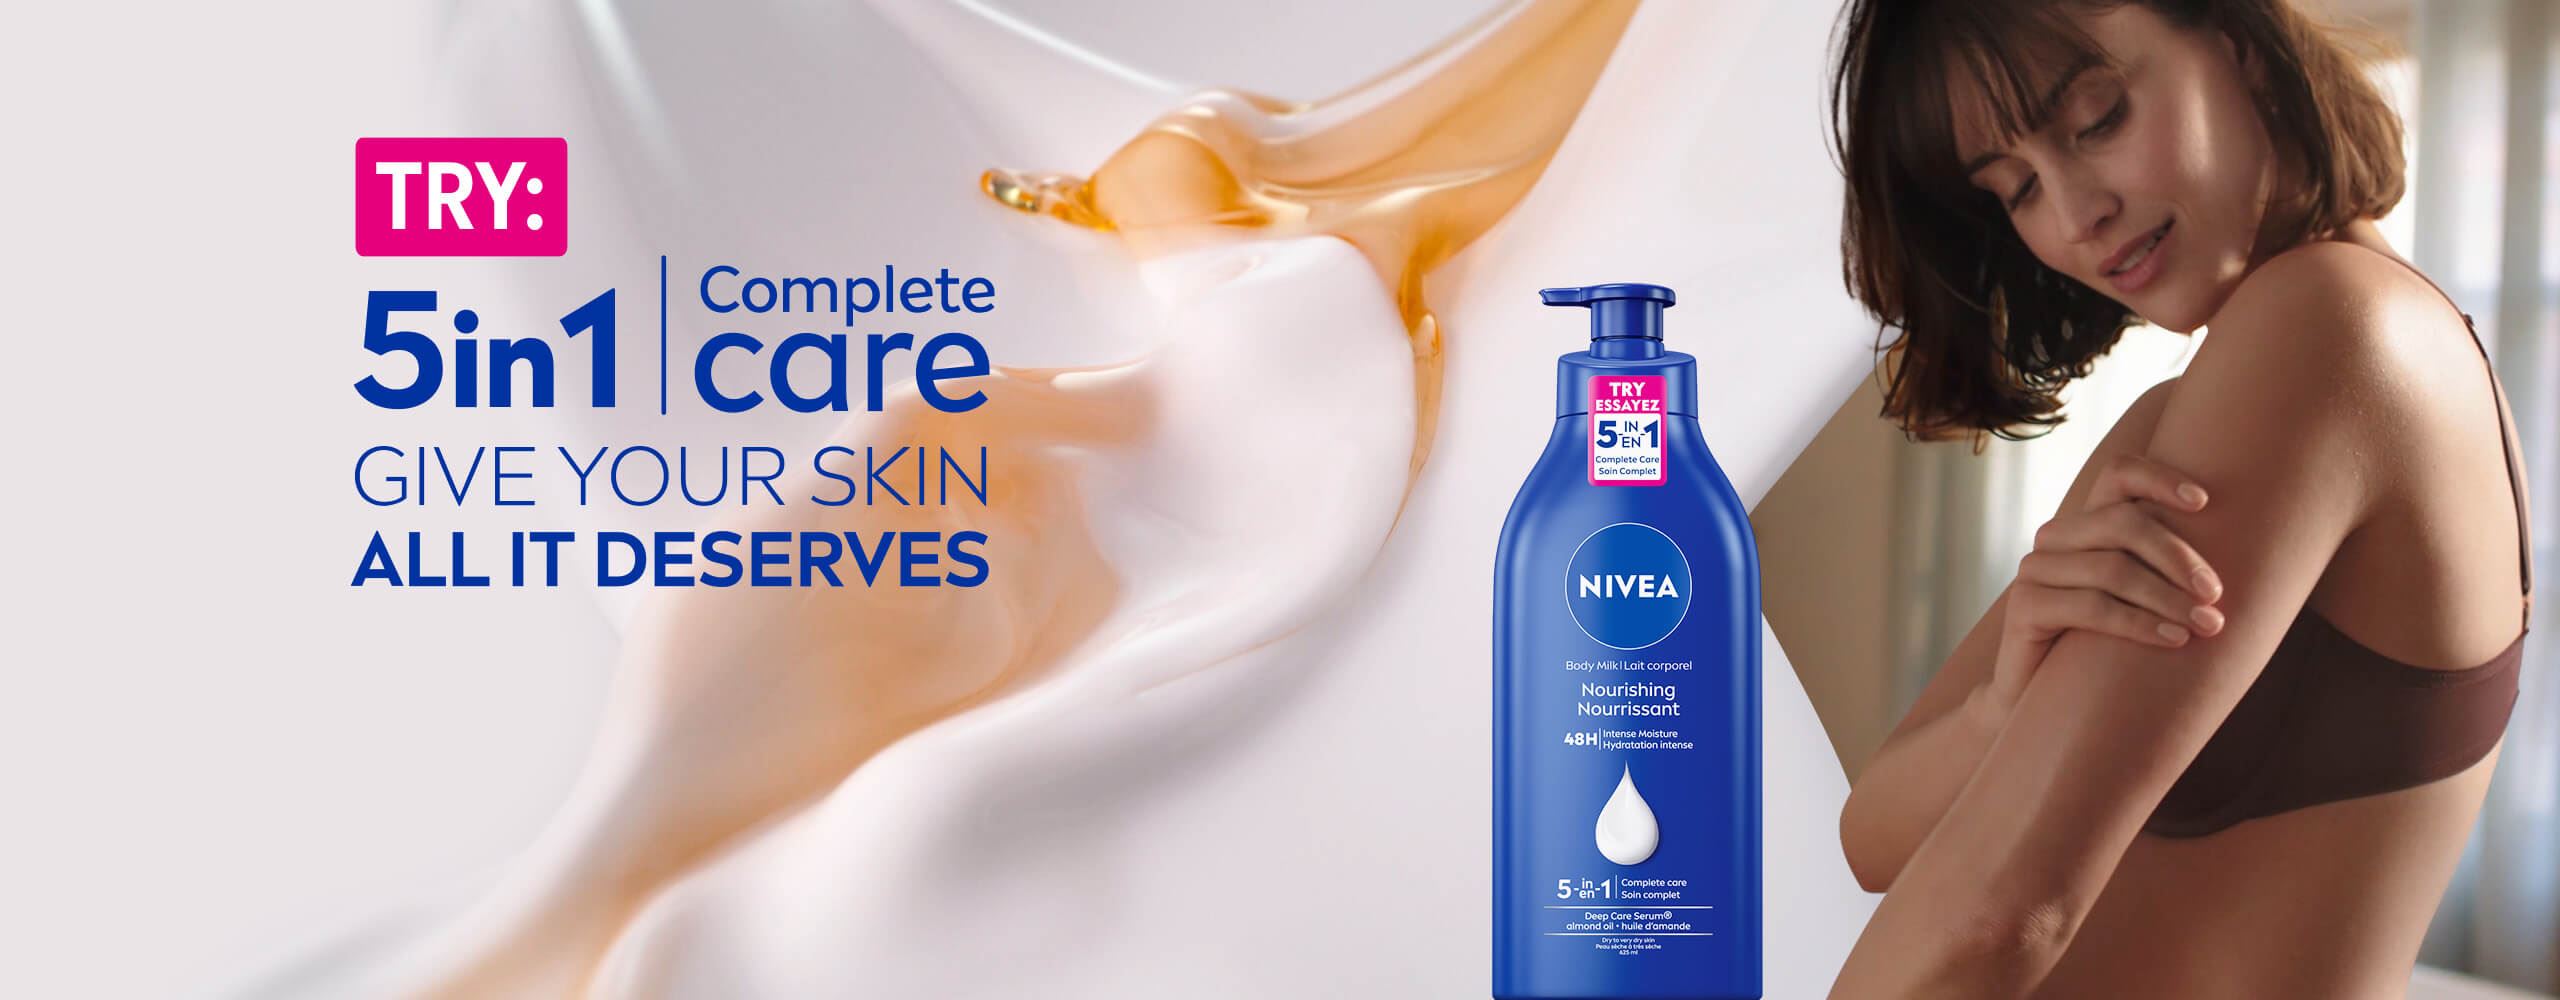 View of a female model holding her left arm with a NIVEA 5-in-1 Complete Care Nourishing Body Milk product and product text displayed to the left.